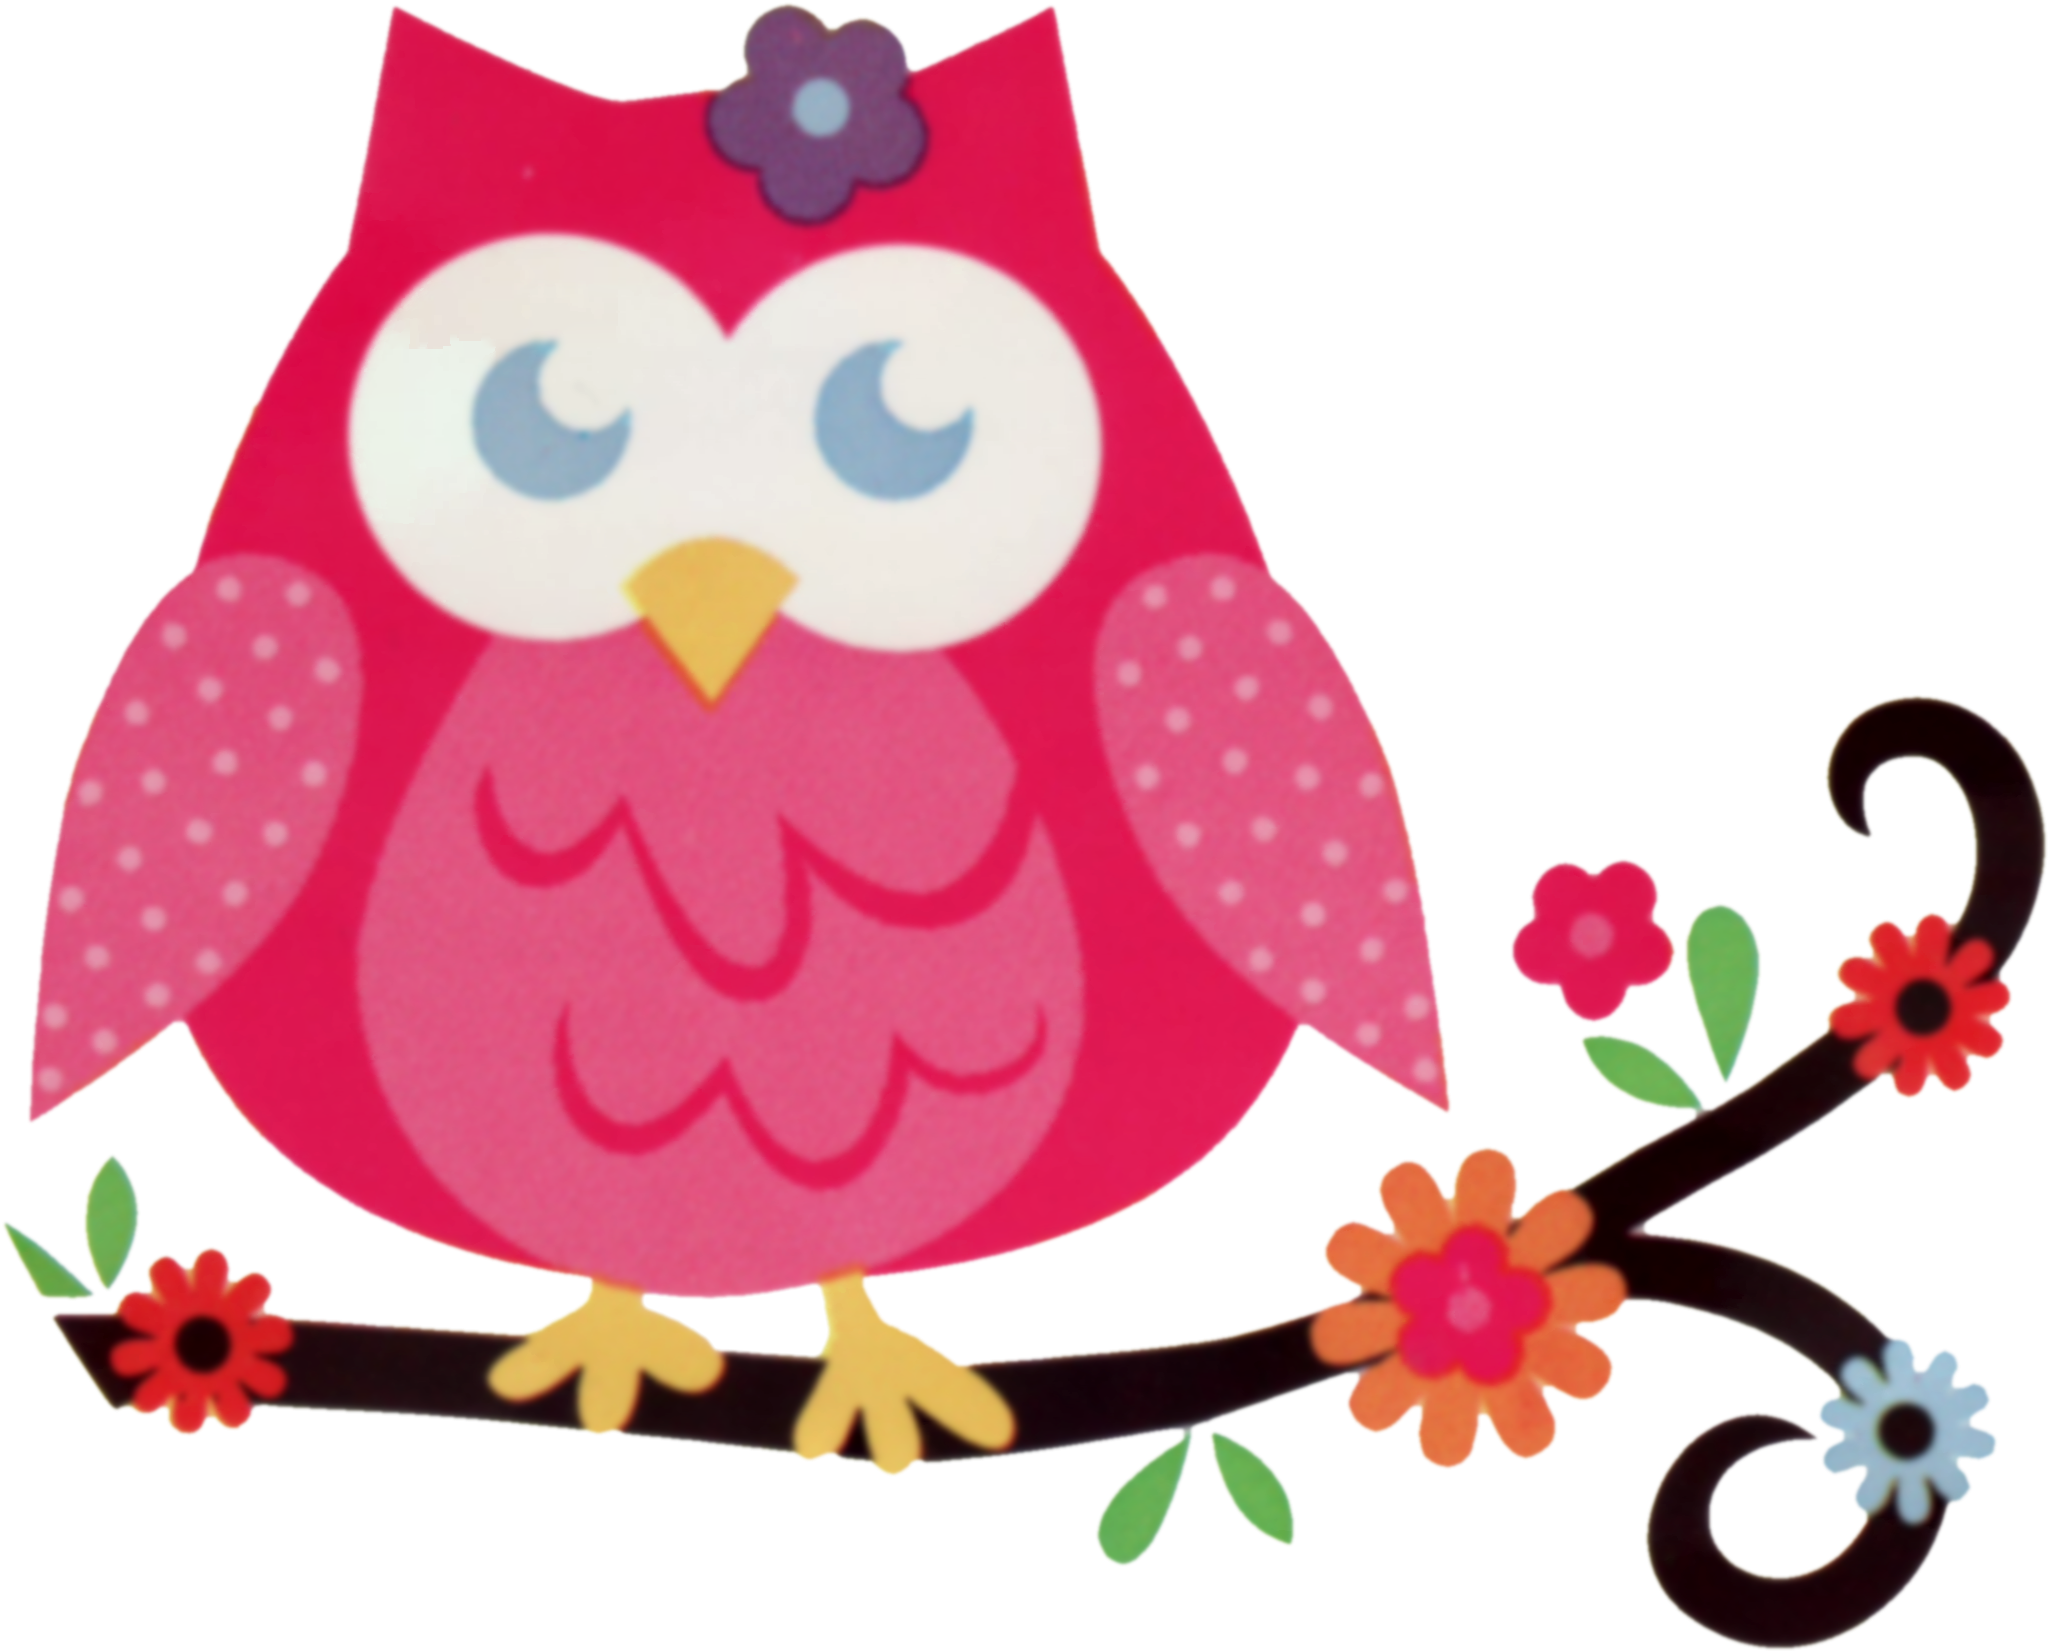 Cute Owl Theme For Birthday Party - Owl Printed Cake Topper (2101x1743)